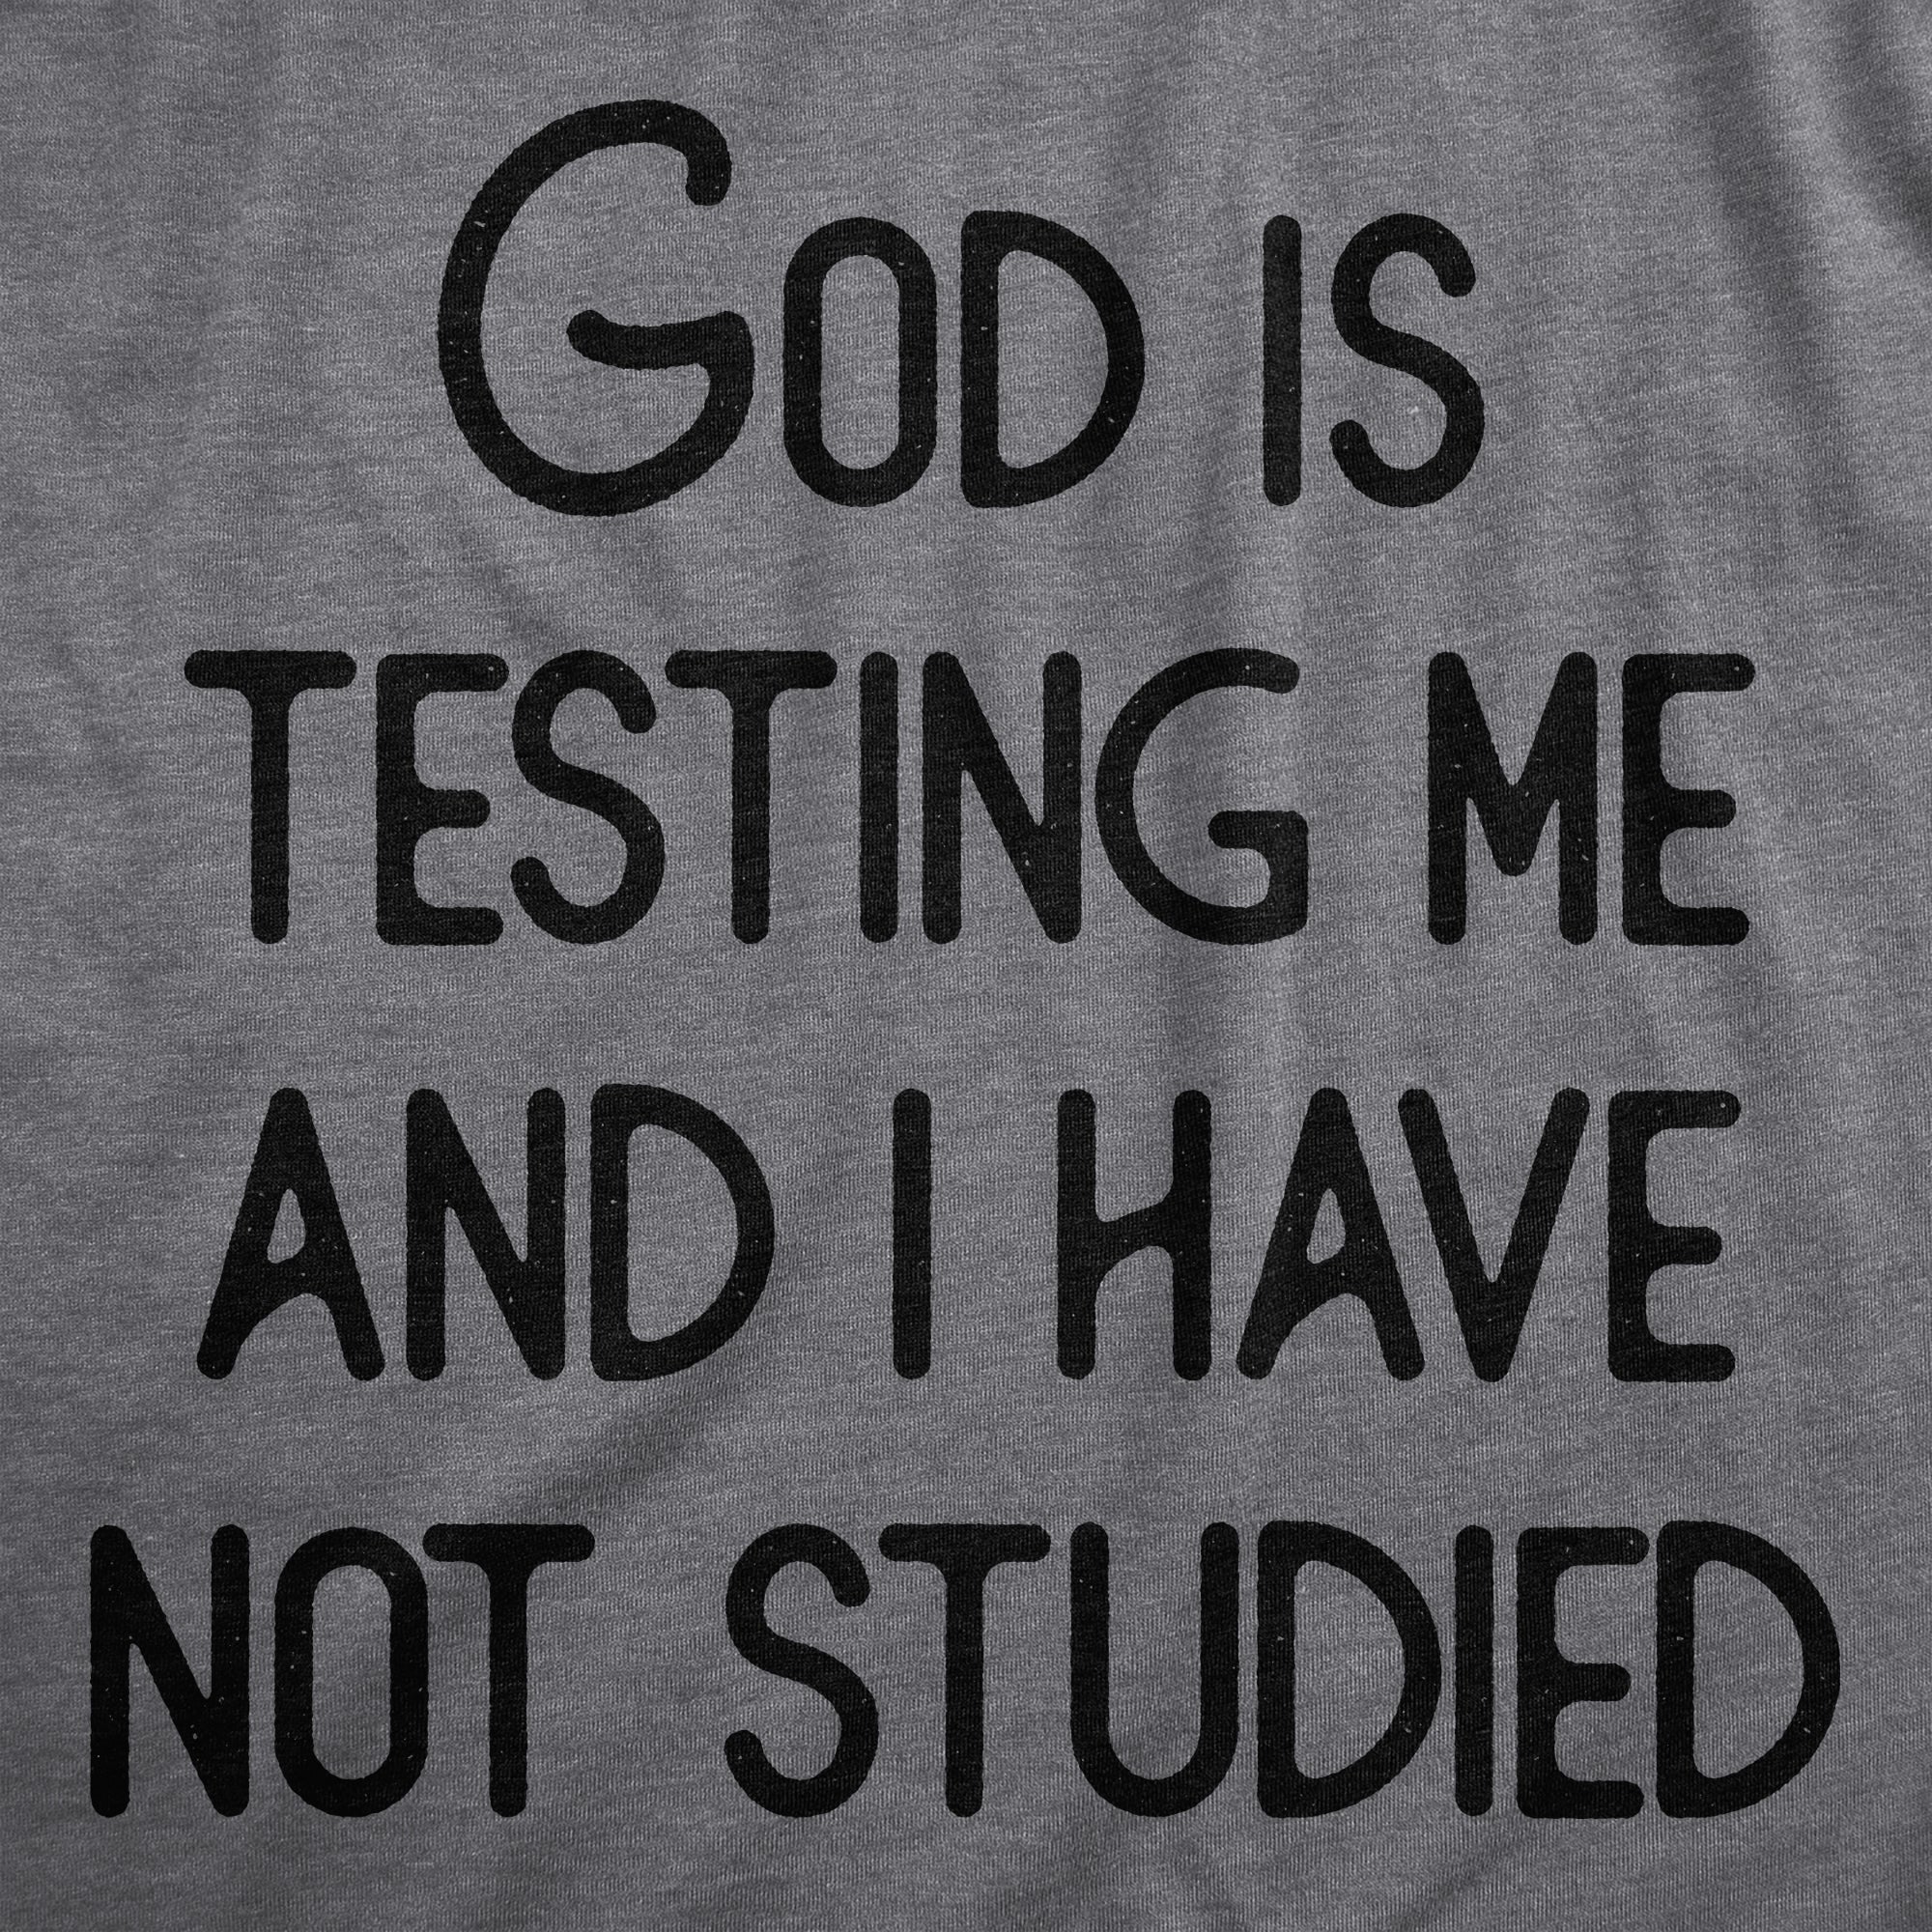 Funny Dark Heather Grey - GOD God Is Testing Me And I Have Not Studied Womens T Shirt Nerdy Sarcastic Tee